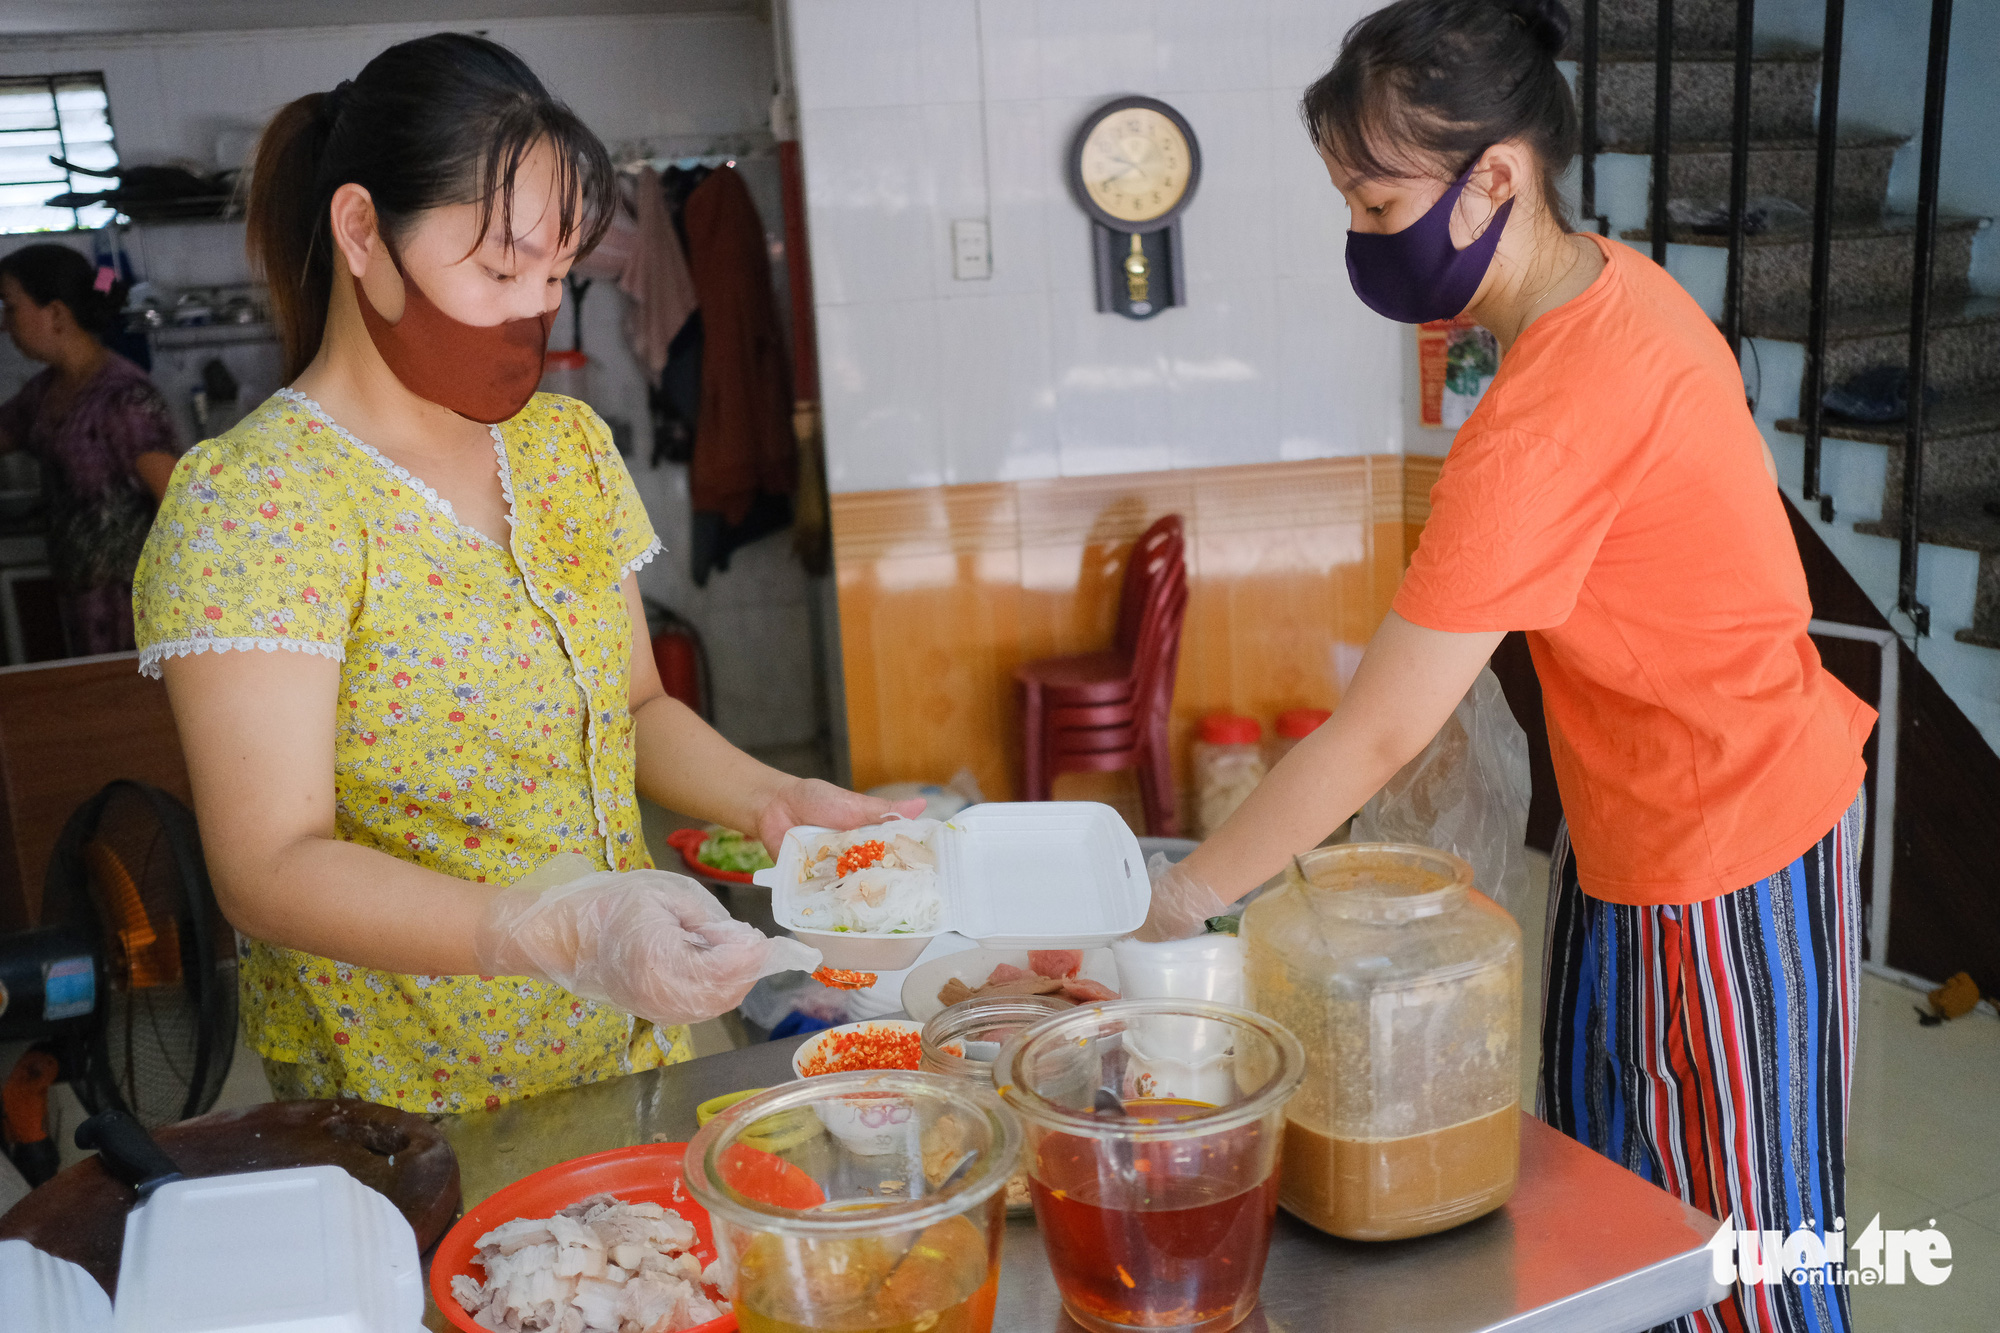 Workers prepare takeouts at a noodles store in Thanh Khe District, Da Nang, September 16, 2021. Photo: Tan Luc / Tuoi Tre